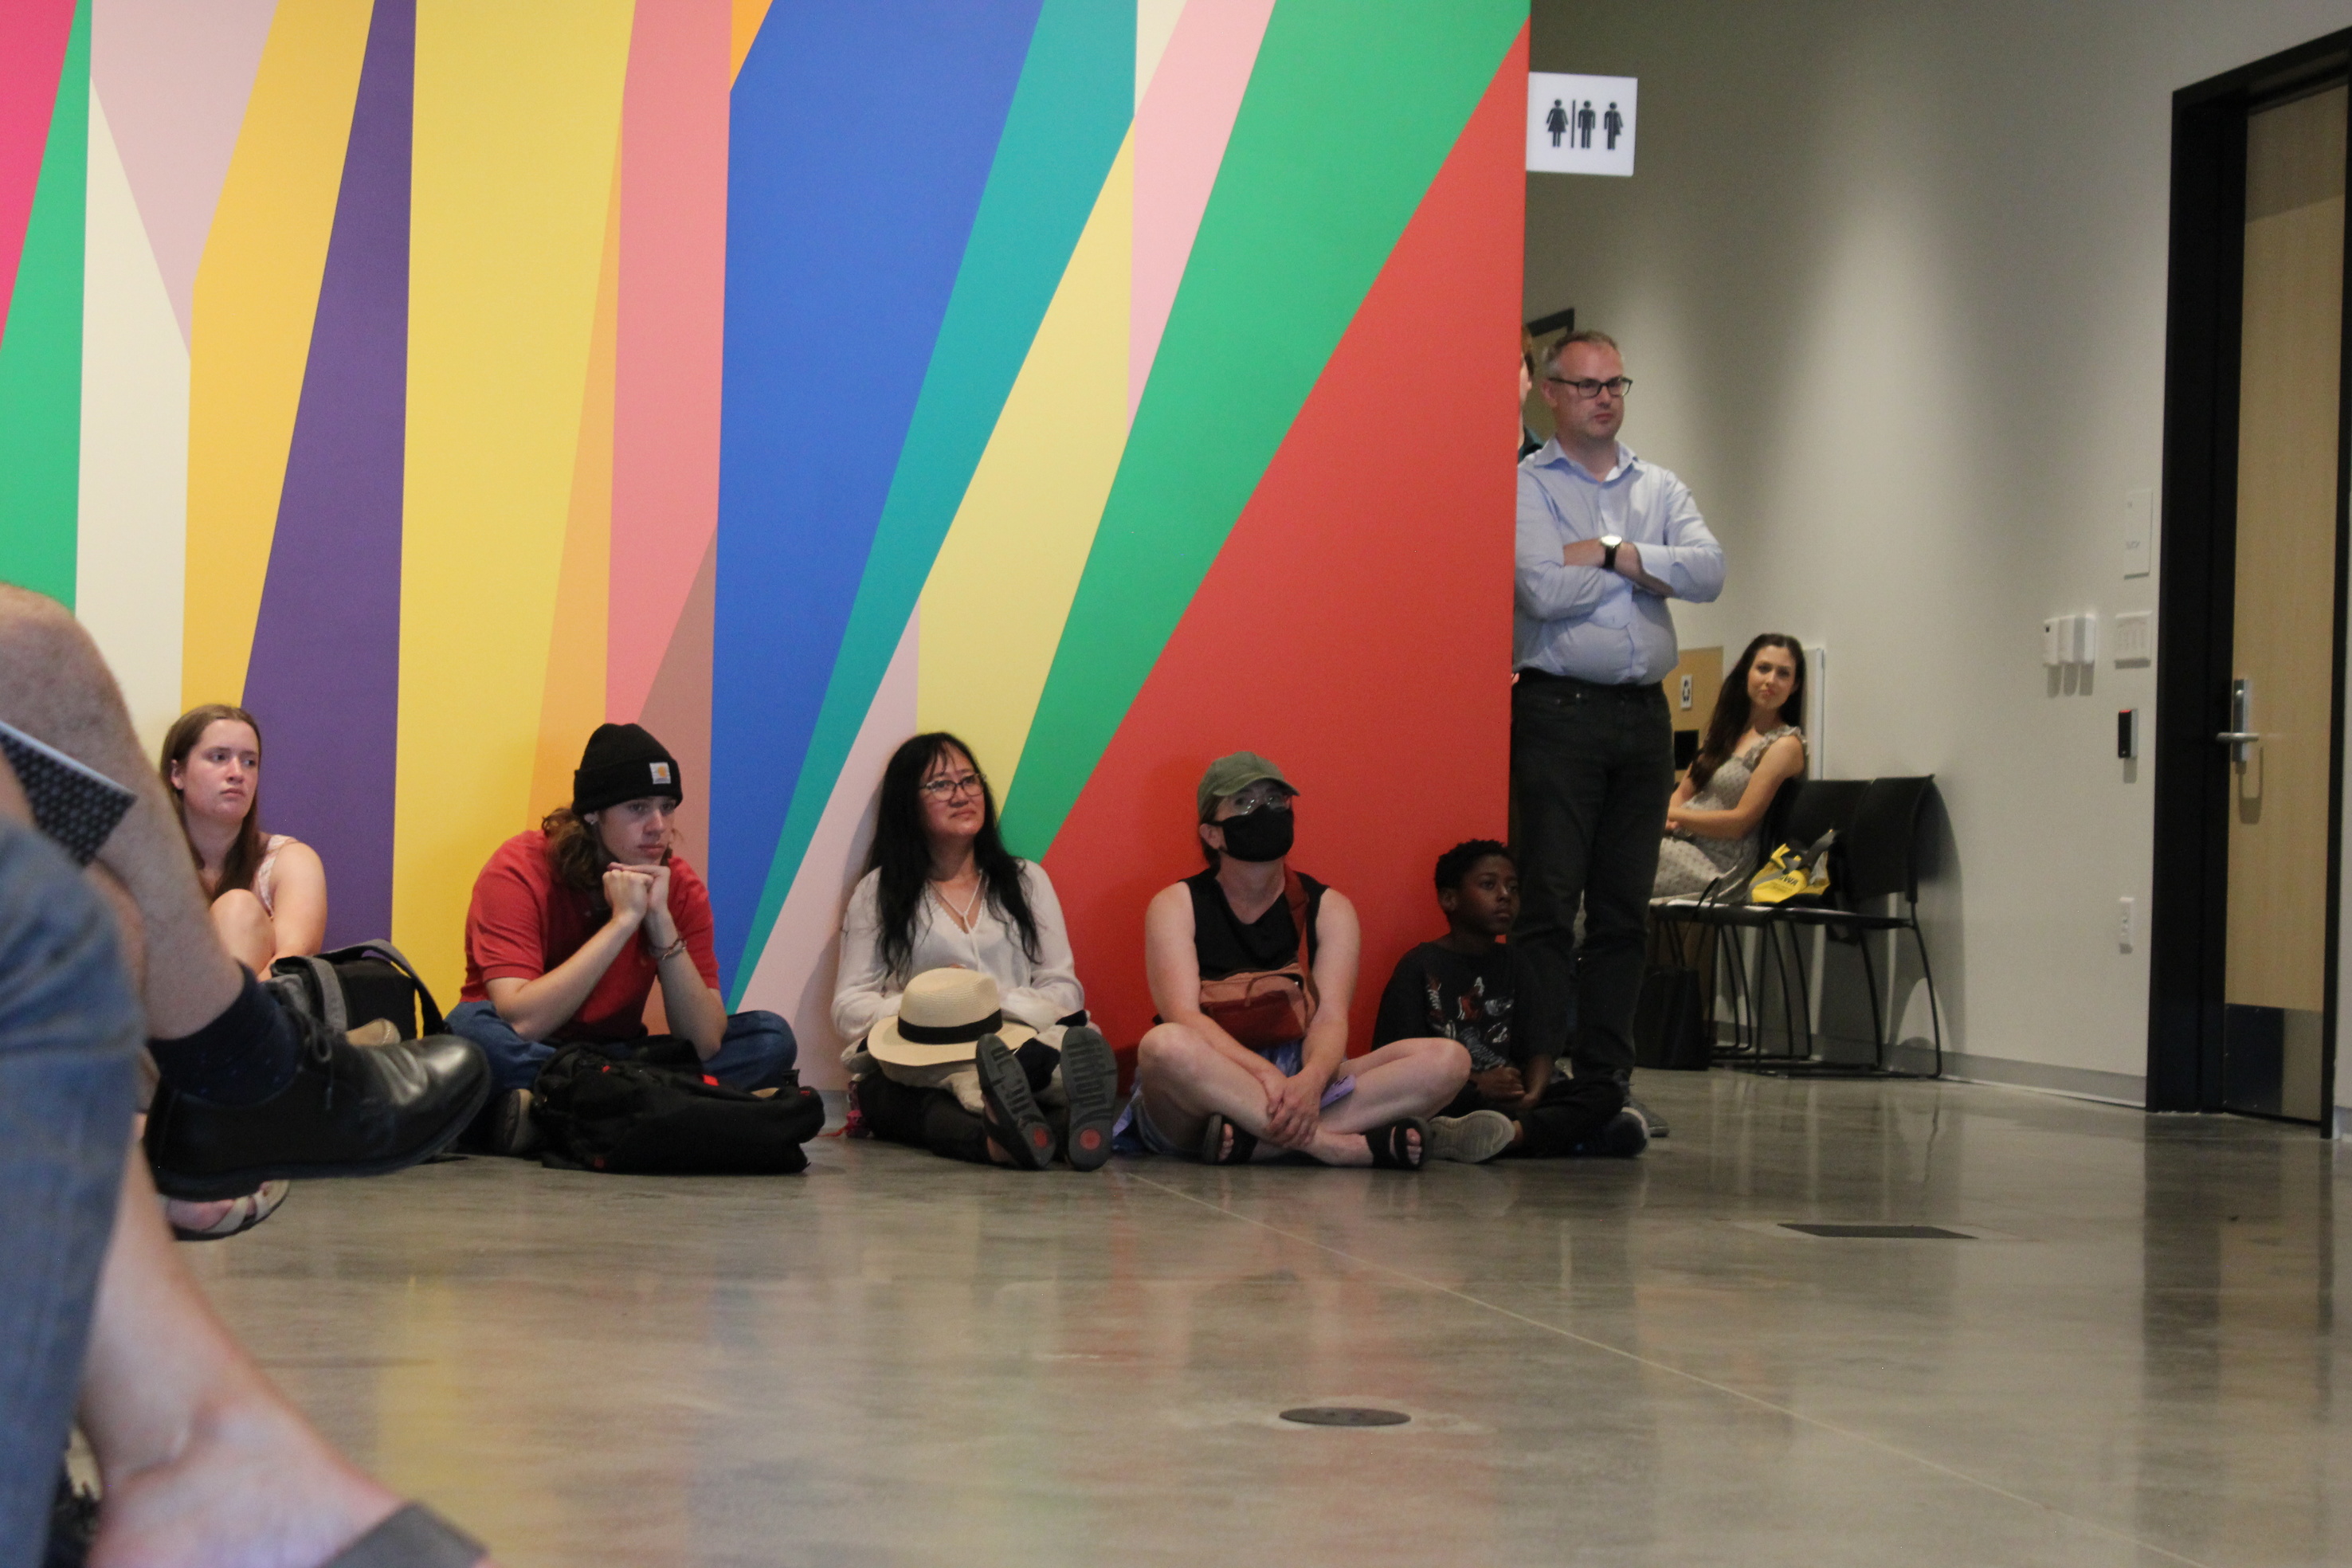 Visitor sitting on the floor to watch a performance in the lobby of building. There is a brightly-colored, geometric wall mural behind them